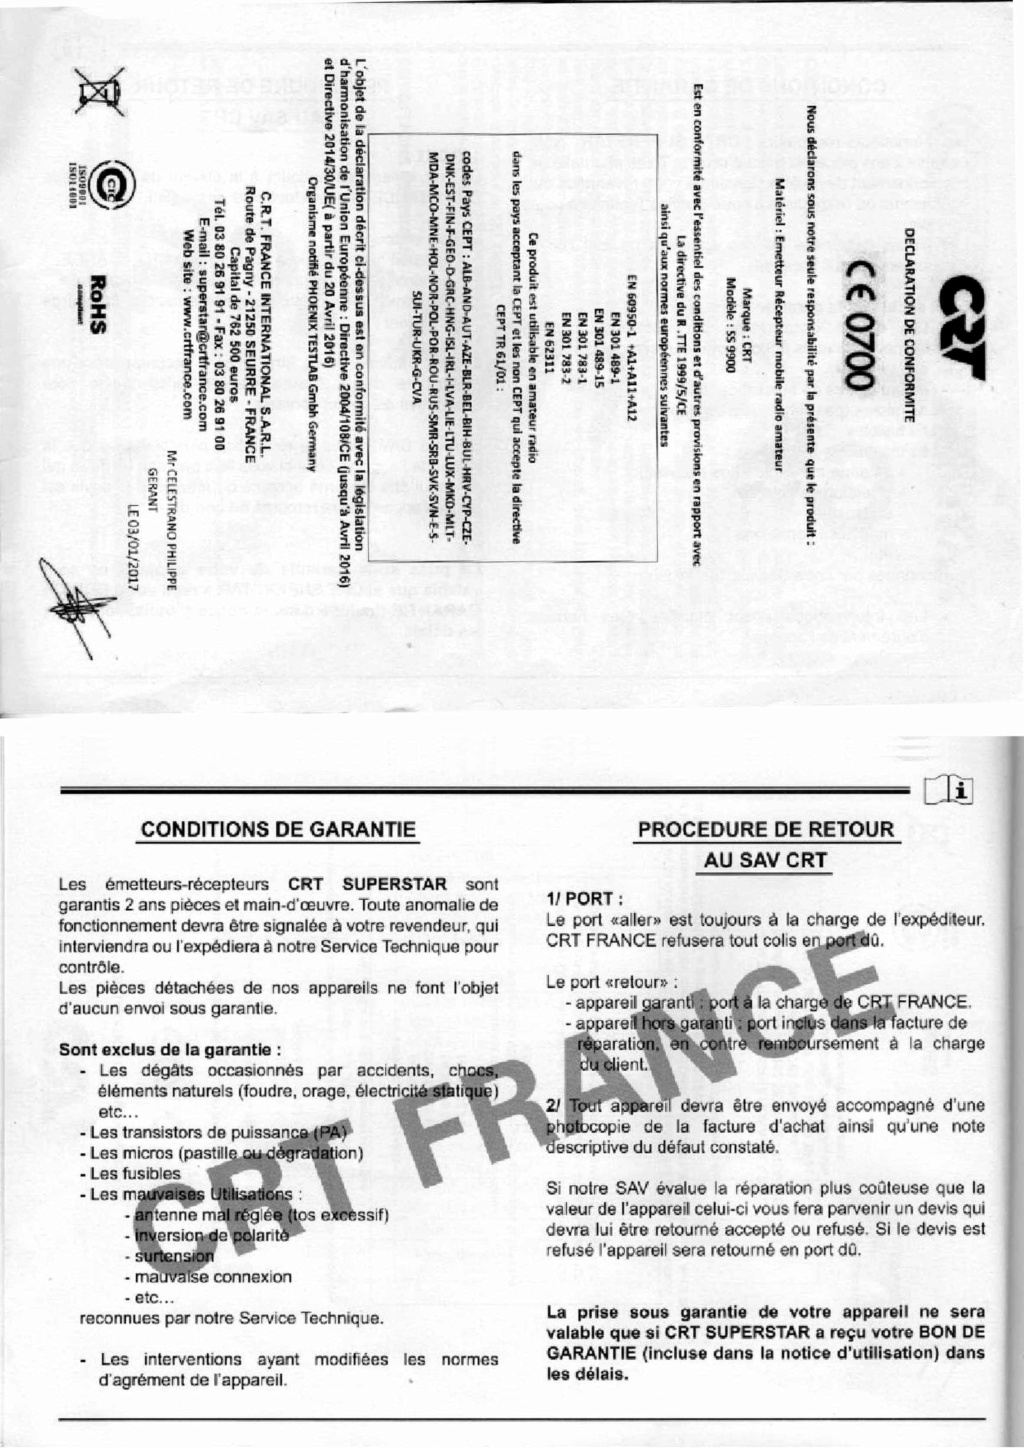 manuel - CRT SS 9900 v4 (Mobile) - Page 17 Feuill22